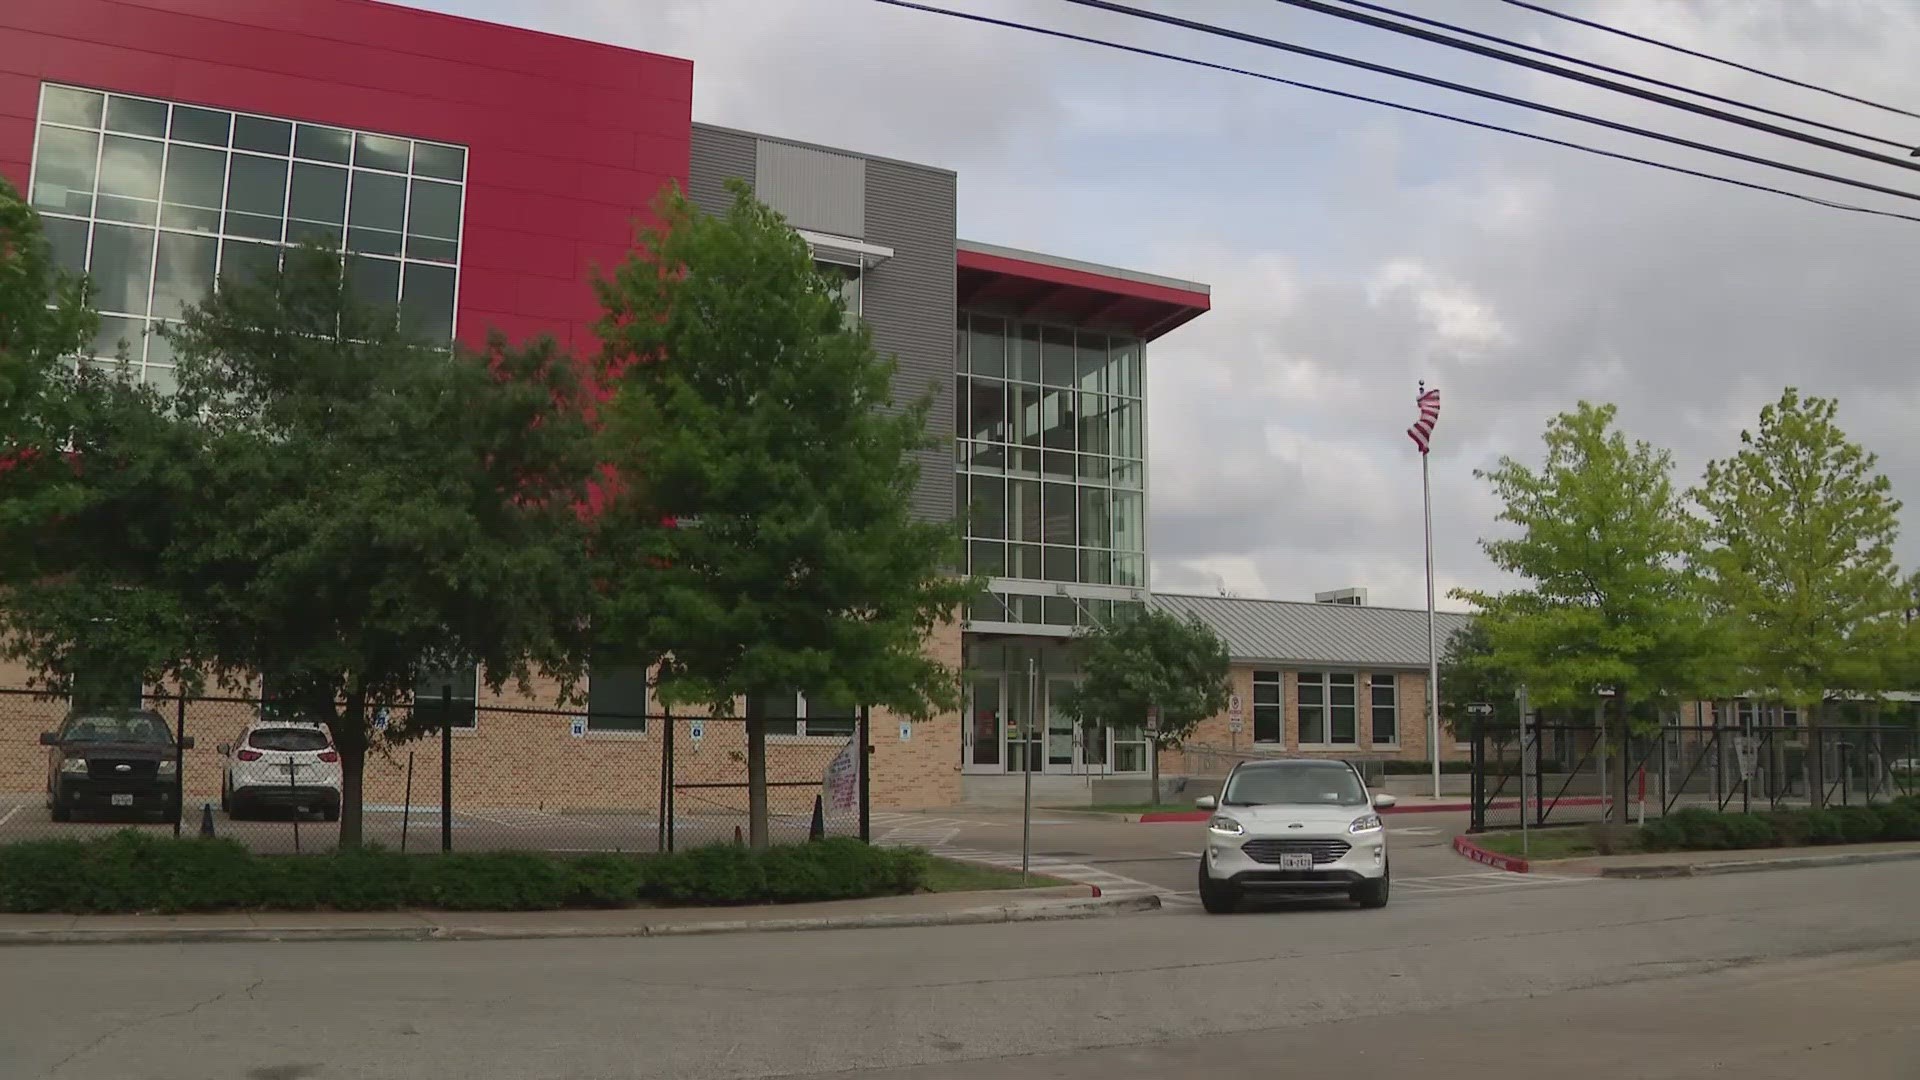 Parents in the Montrose area are angry after some recent changes at Houston ISD. They’re worried their kids won’t be able to attend their neighborhood school.